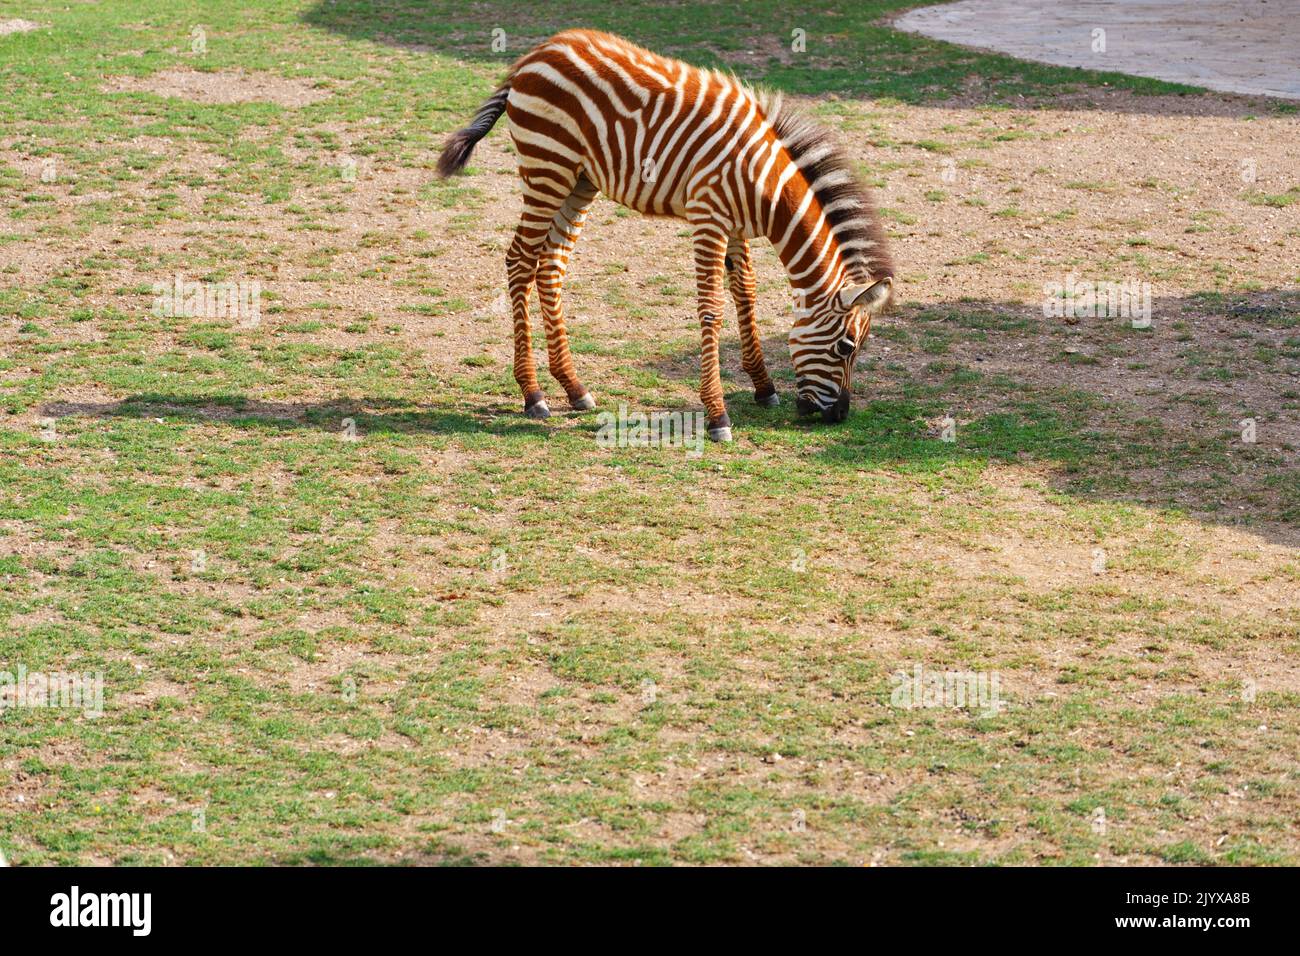 Baby Zebra with brown and white colors eating grass outdoor Stock Photo